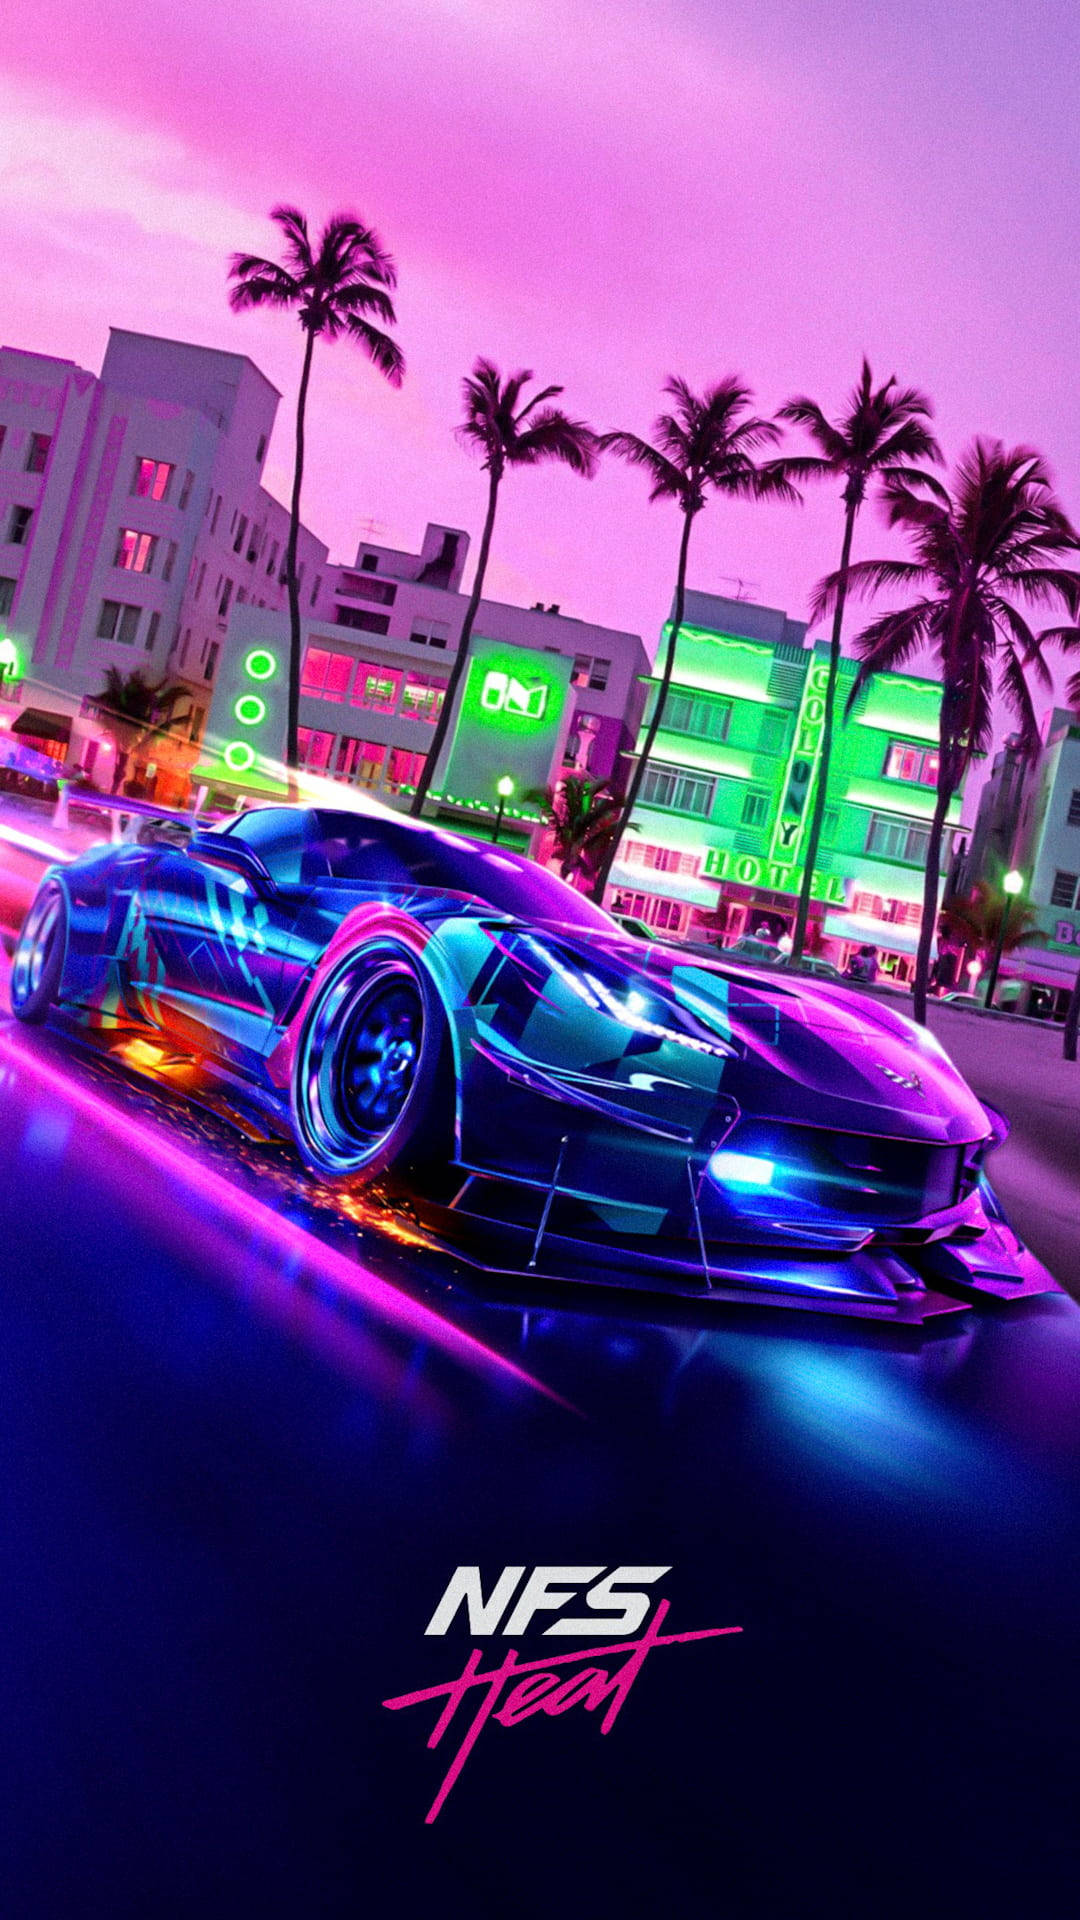 Intense Racing Action in Need for Speed: Heat Wallpaper